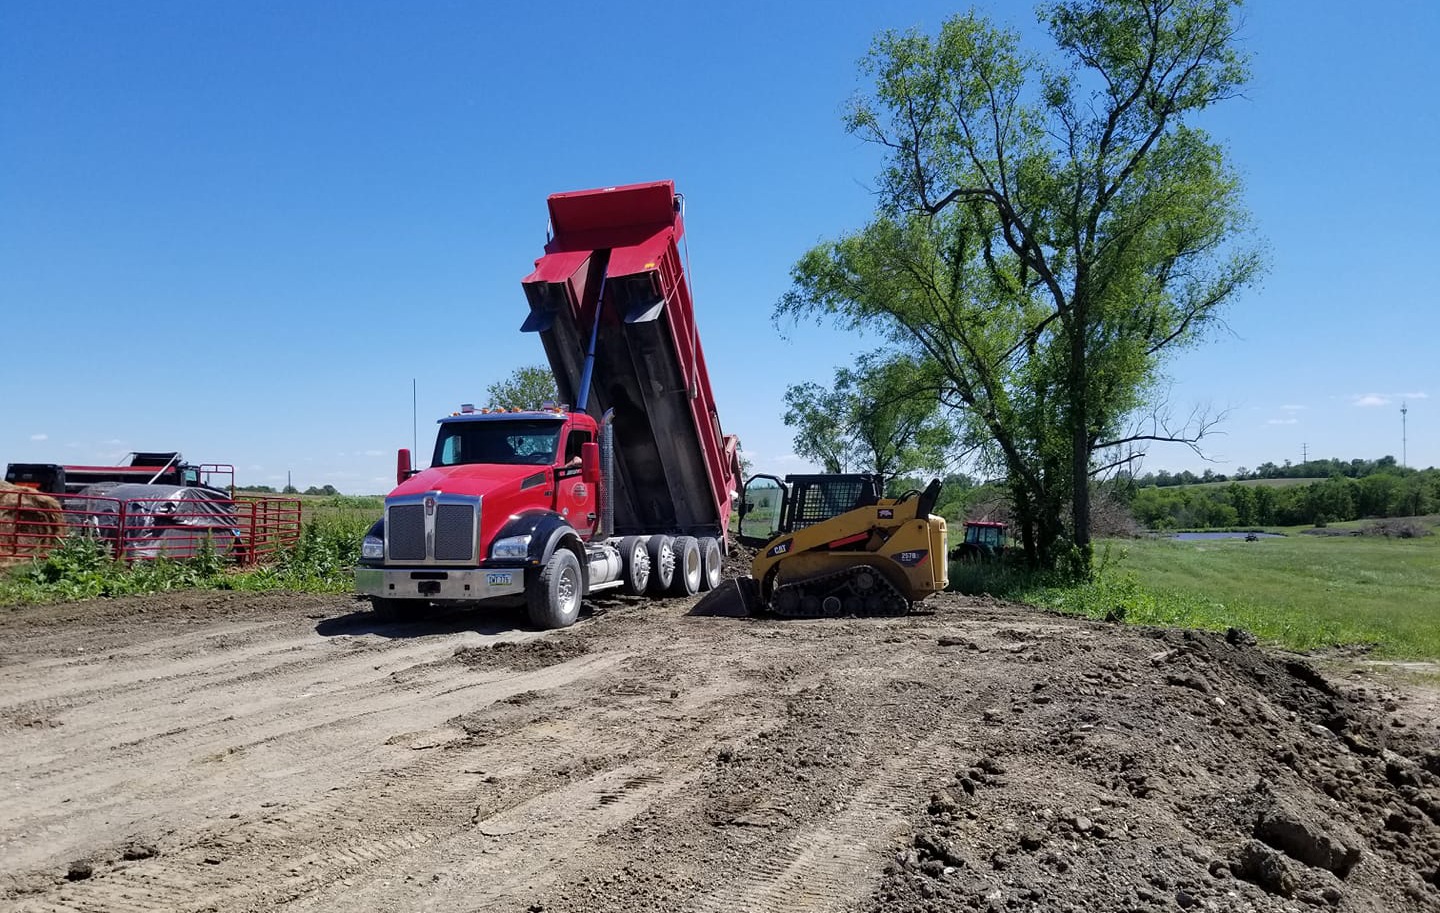 Dump truck and skid loader used on an excavating and grading project.